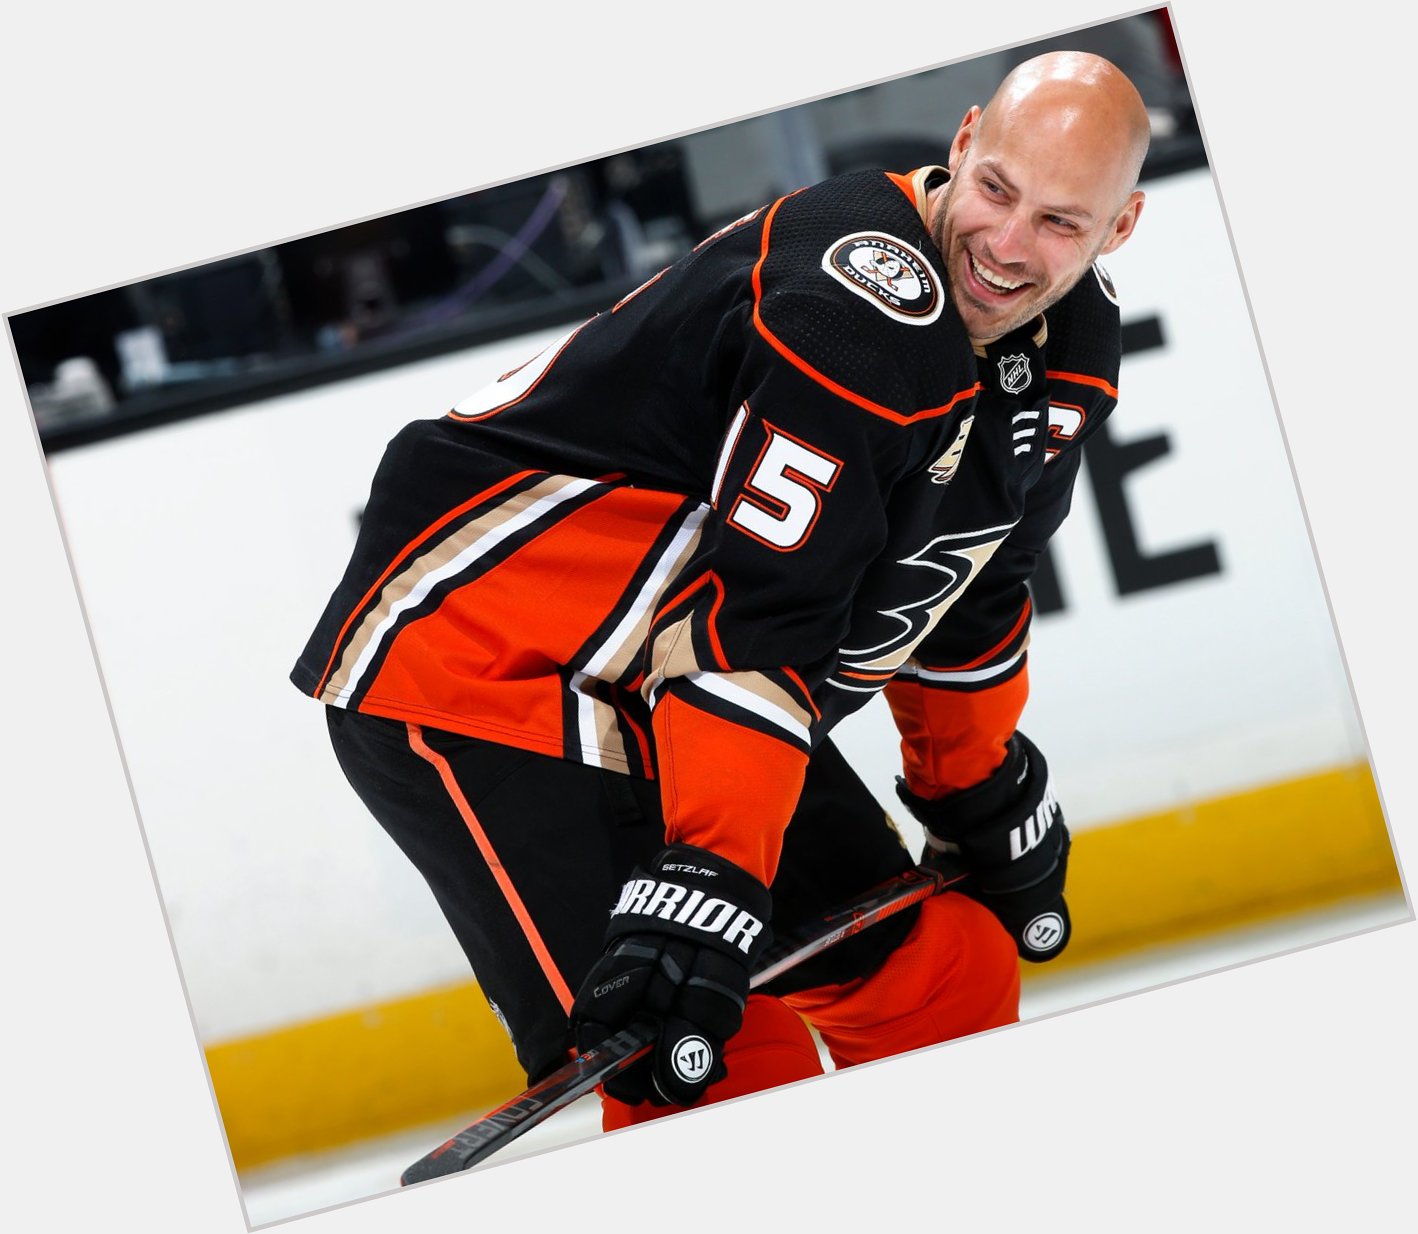 What\s better than one birthday?

TWO BIRTHDAYS!

Happy birthday, Ryan Getzlaf and Enjoy the day!   